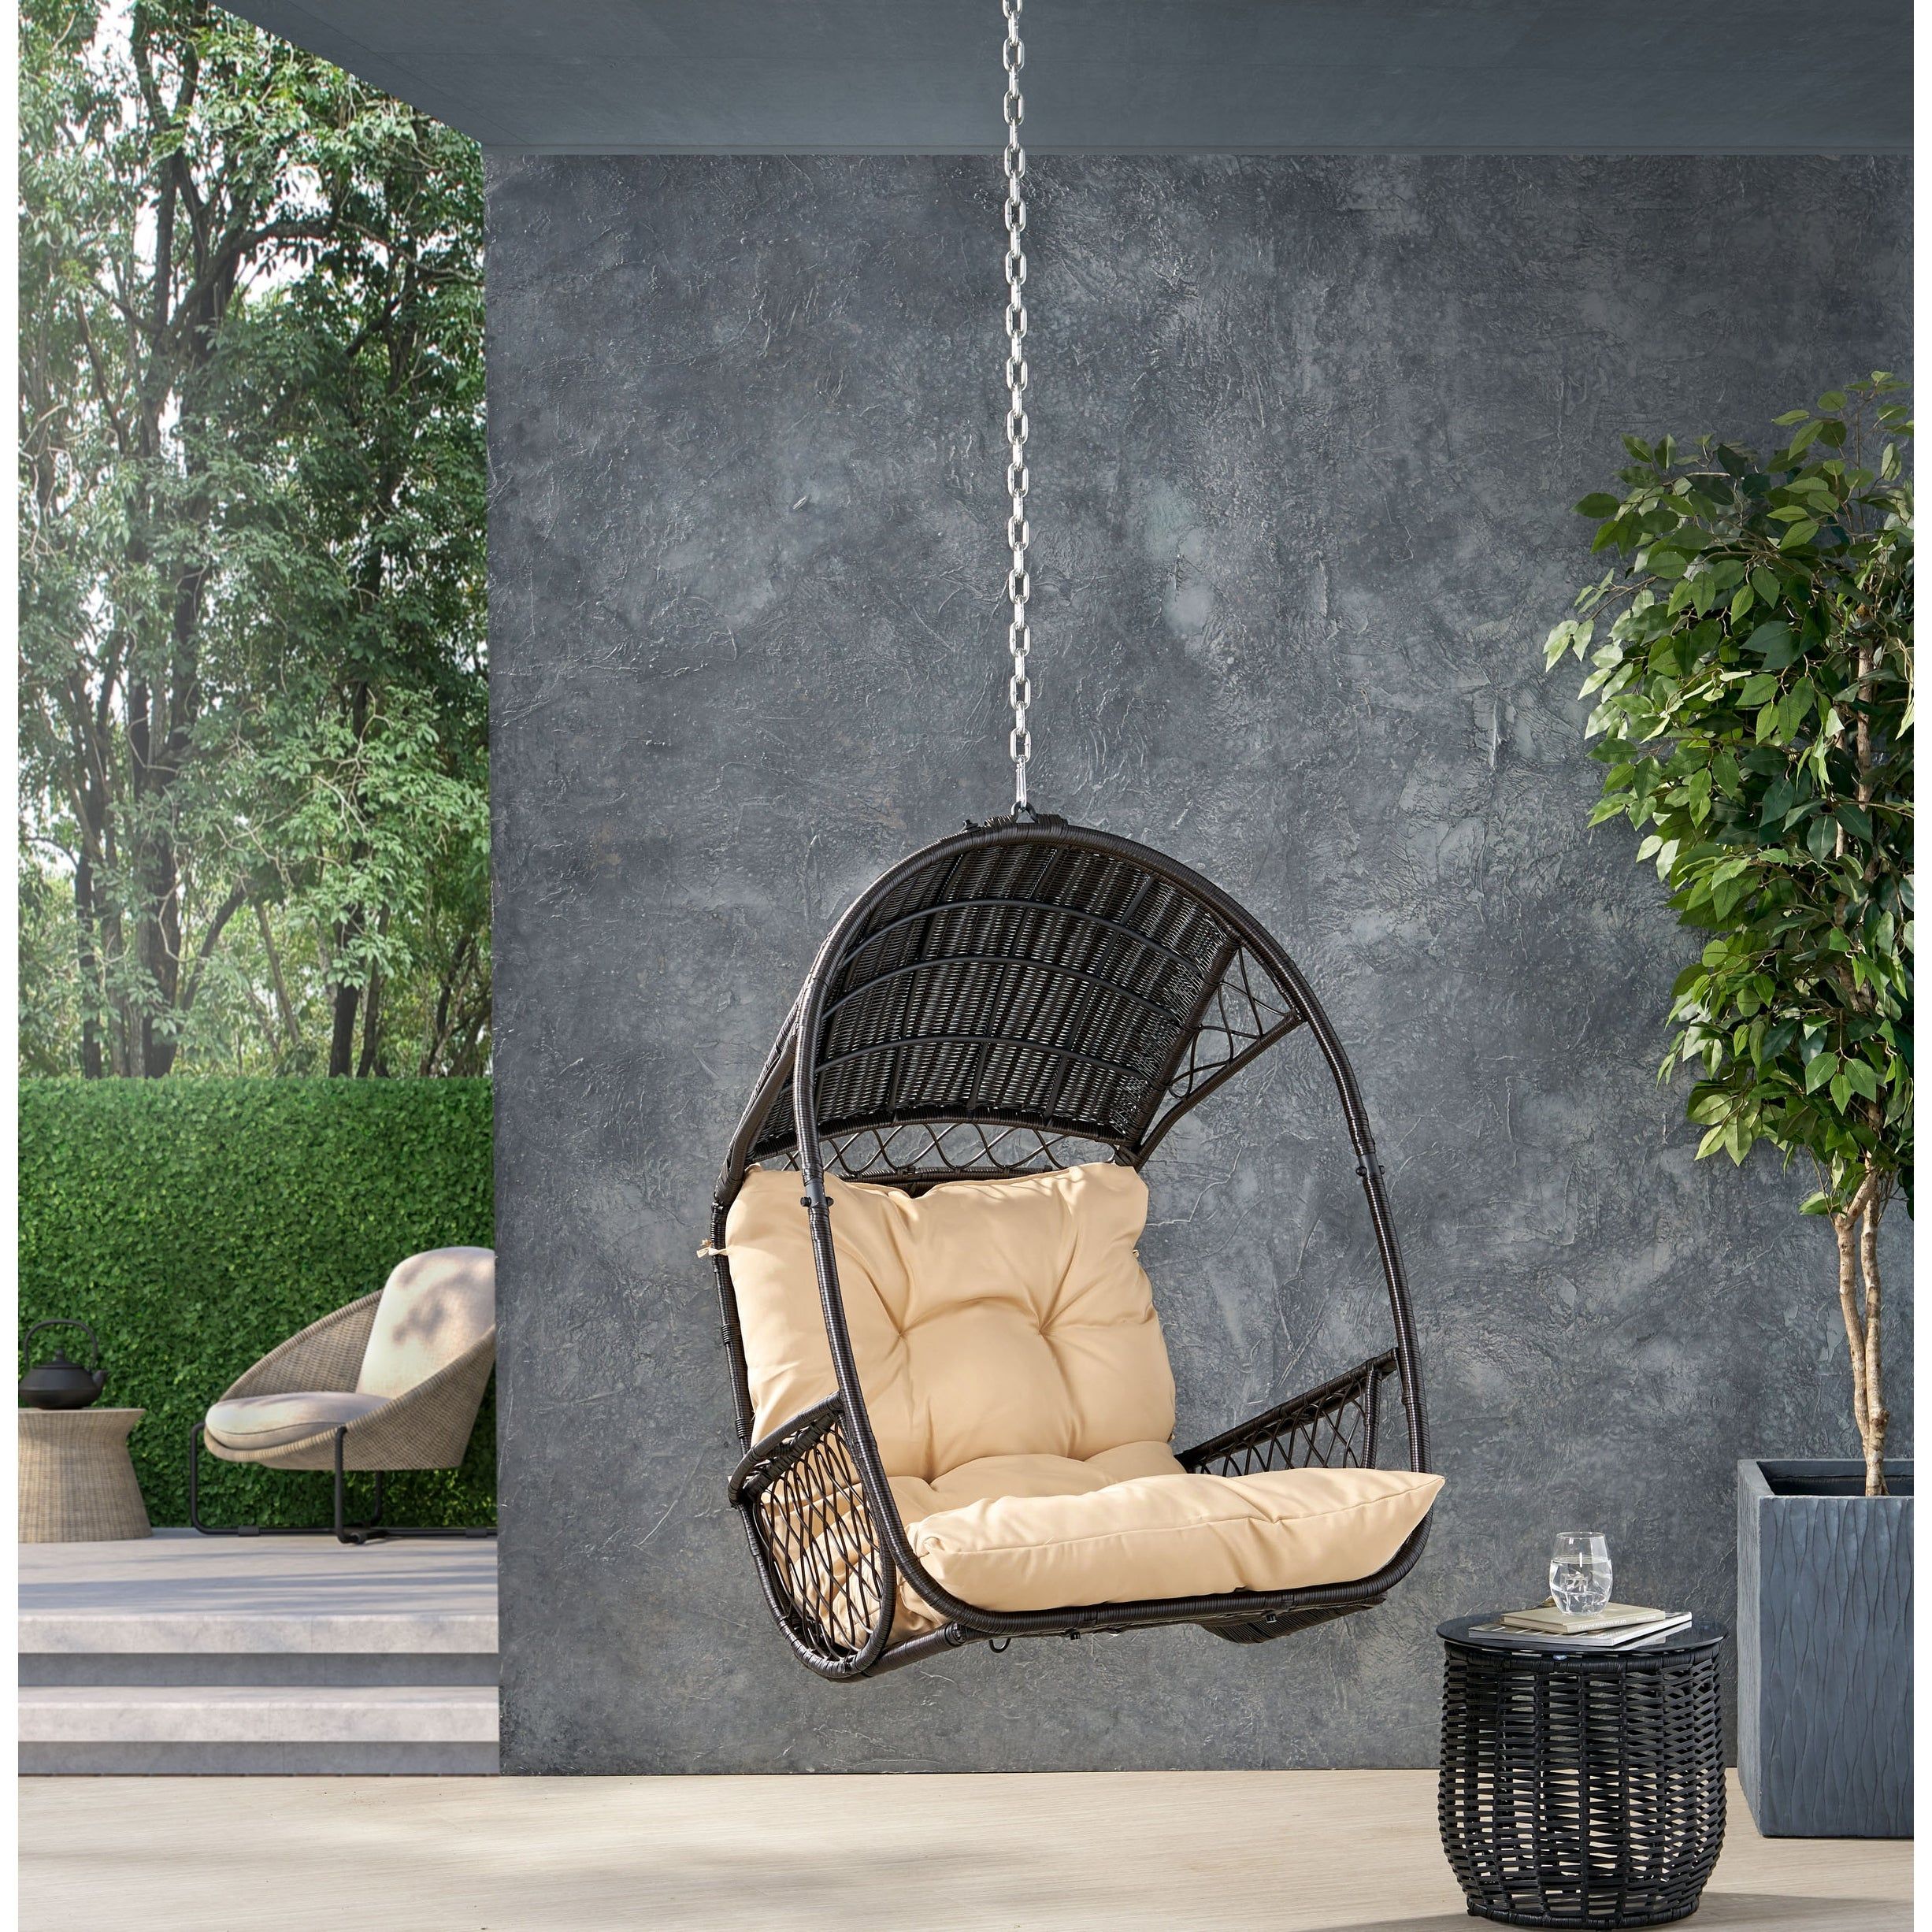 Greystone Outdoor/indoor Wicker Hanging Chair W/8 Foot Chainchristopher  Knight Home – On Sale – Overstock – 31825459 For Greystone Plant Stands (View 8 of 15)